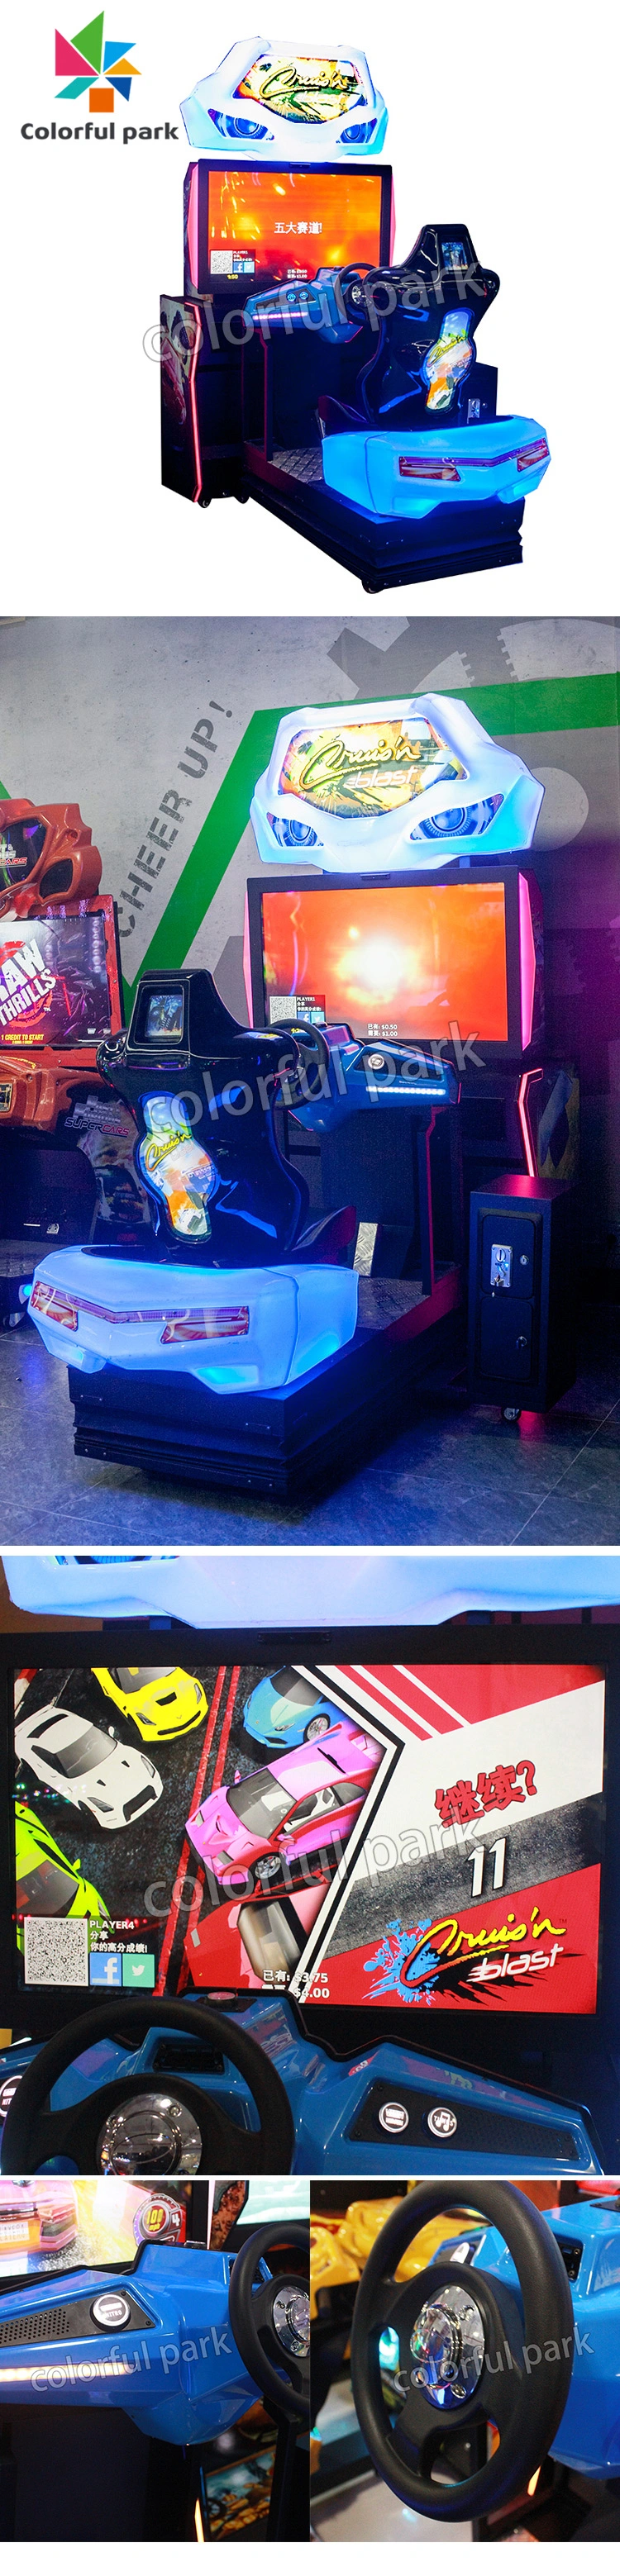 Colorful Park Game Center Arcade Video Game Machine Coin Operated Arcade Game Machine